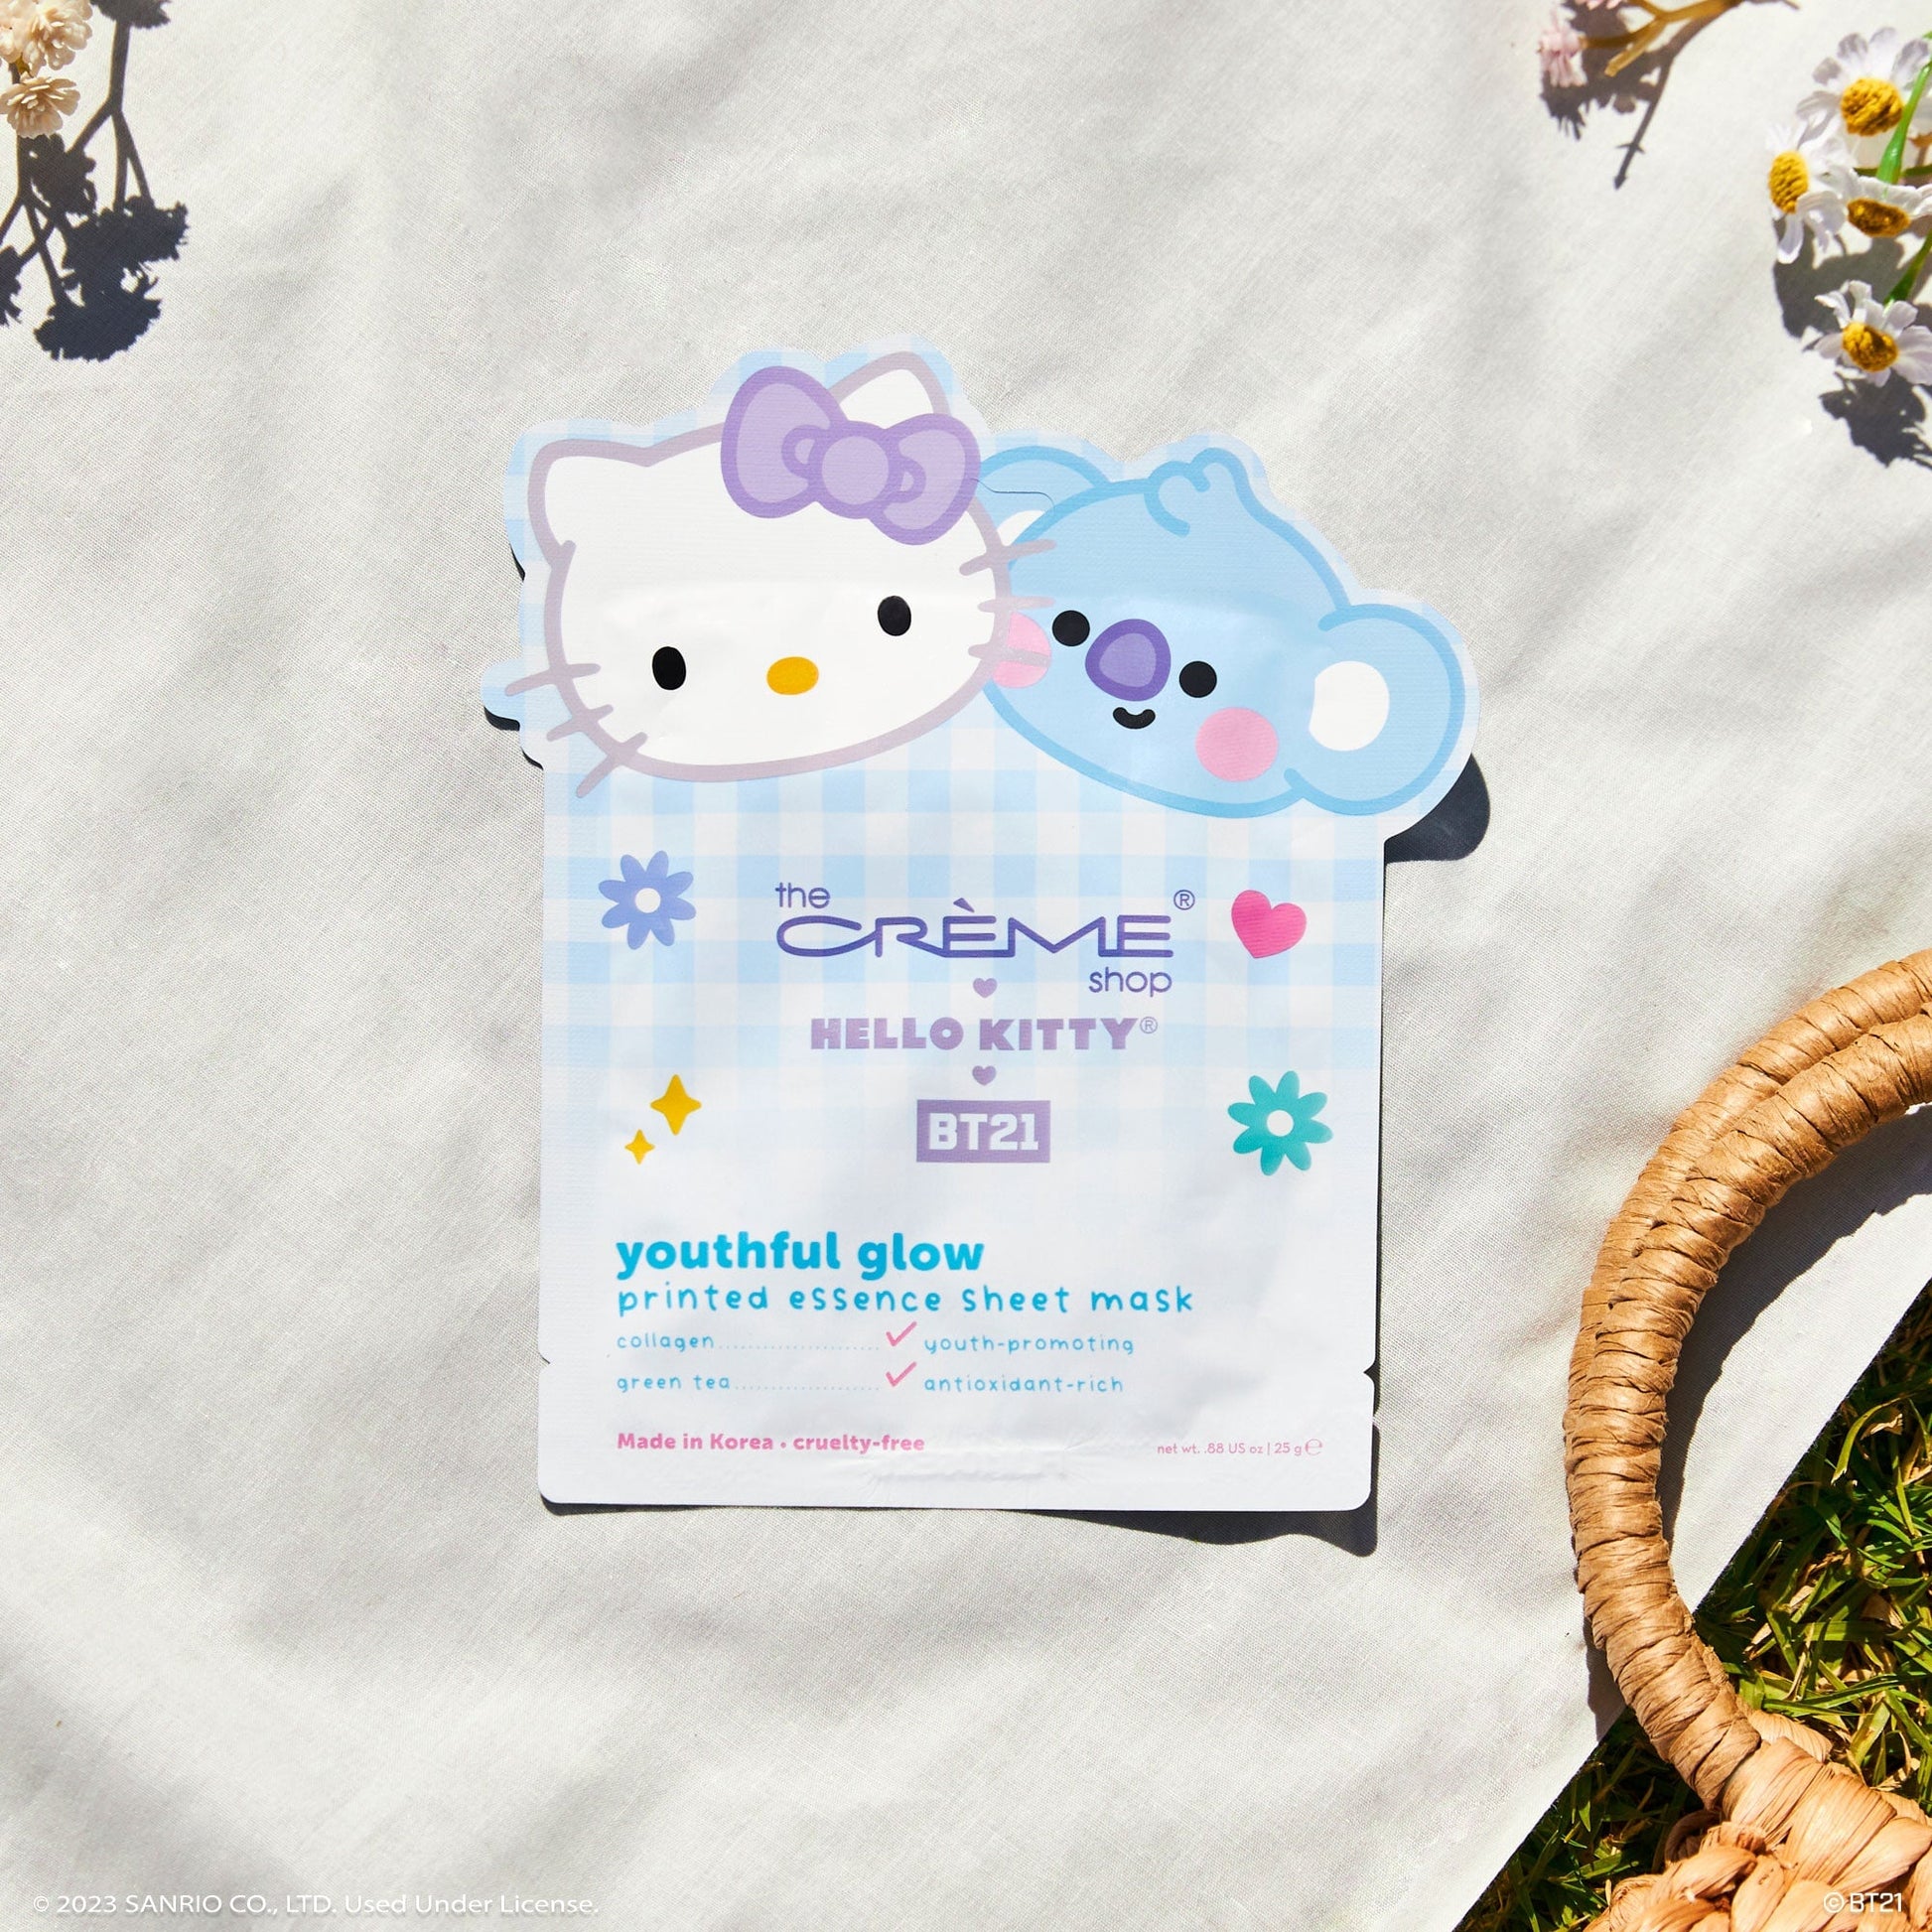 Hello Kitty & BT21 Youthful Glow Printed Essence Sheet Mask with Collagen and Green Tea, $4